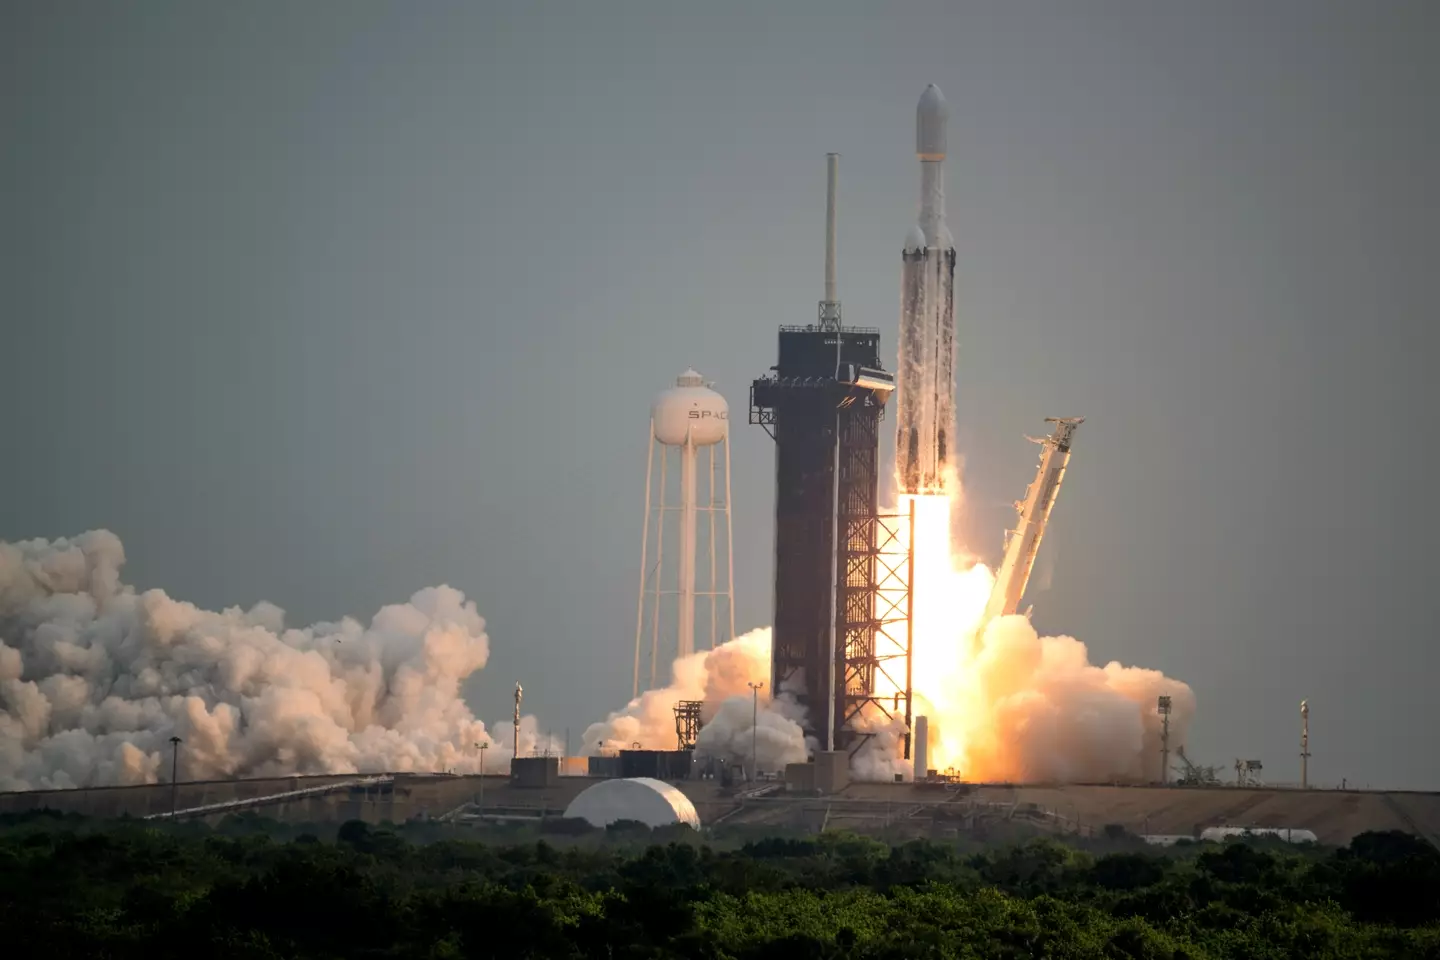 The SpaceX Falcon Heavy rocket launched on Friday, October 13.